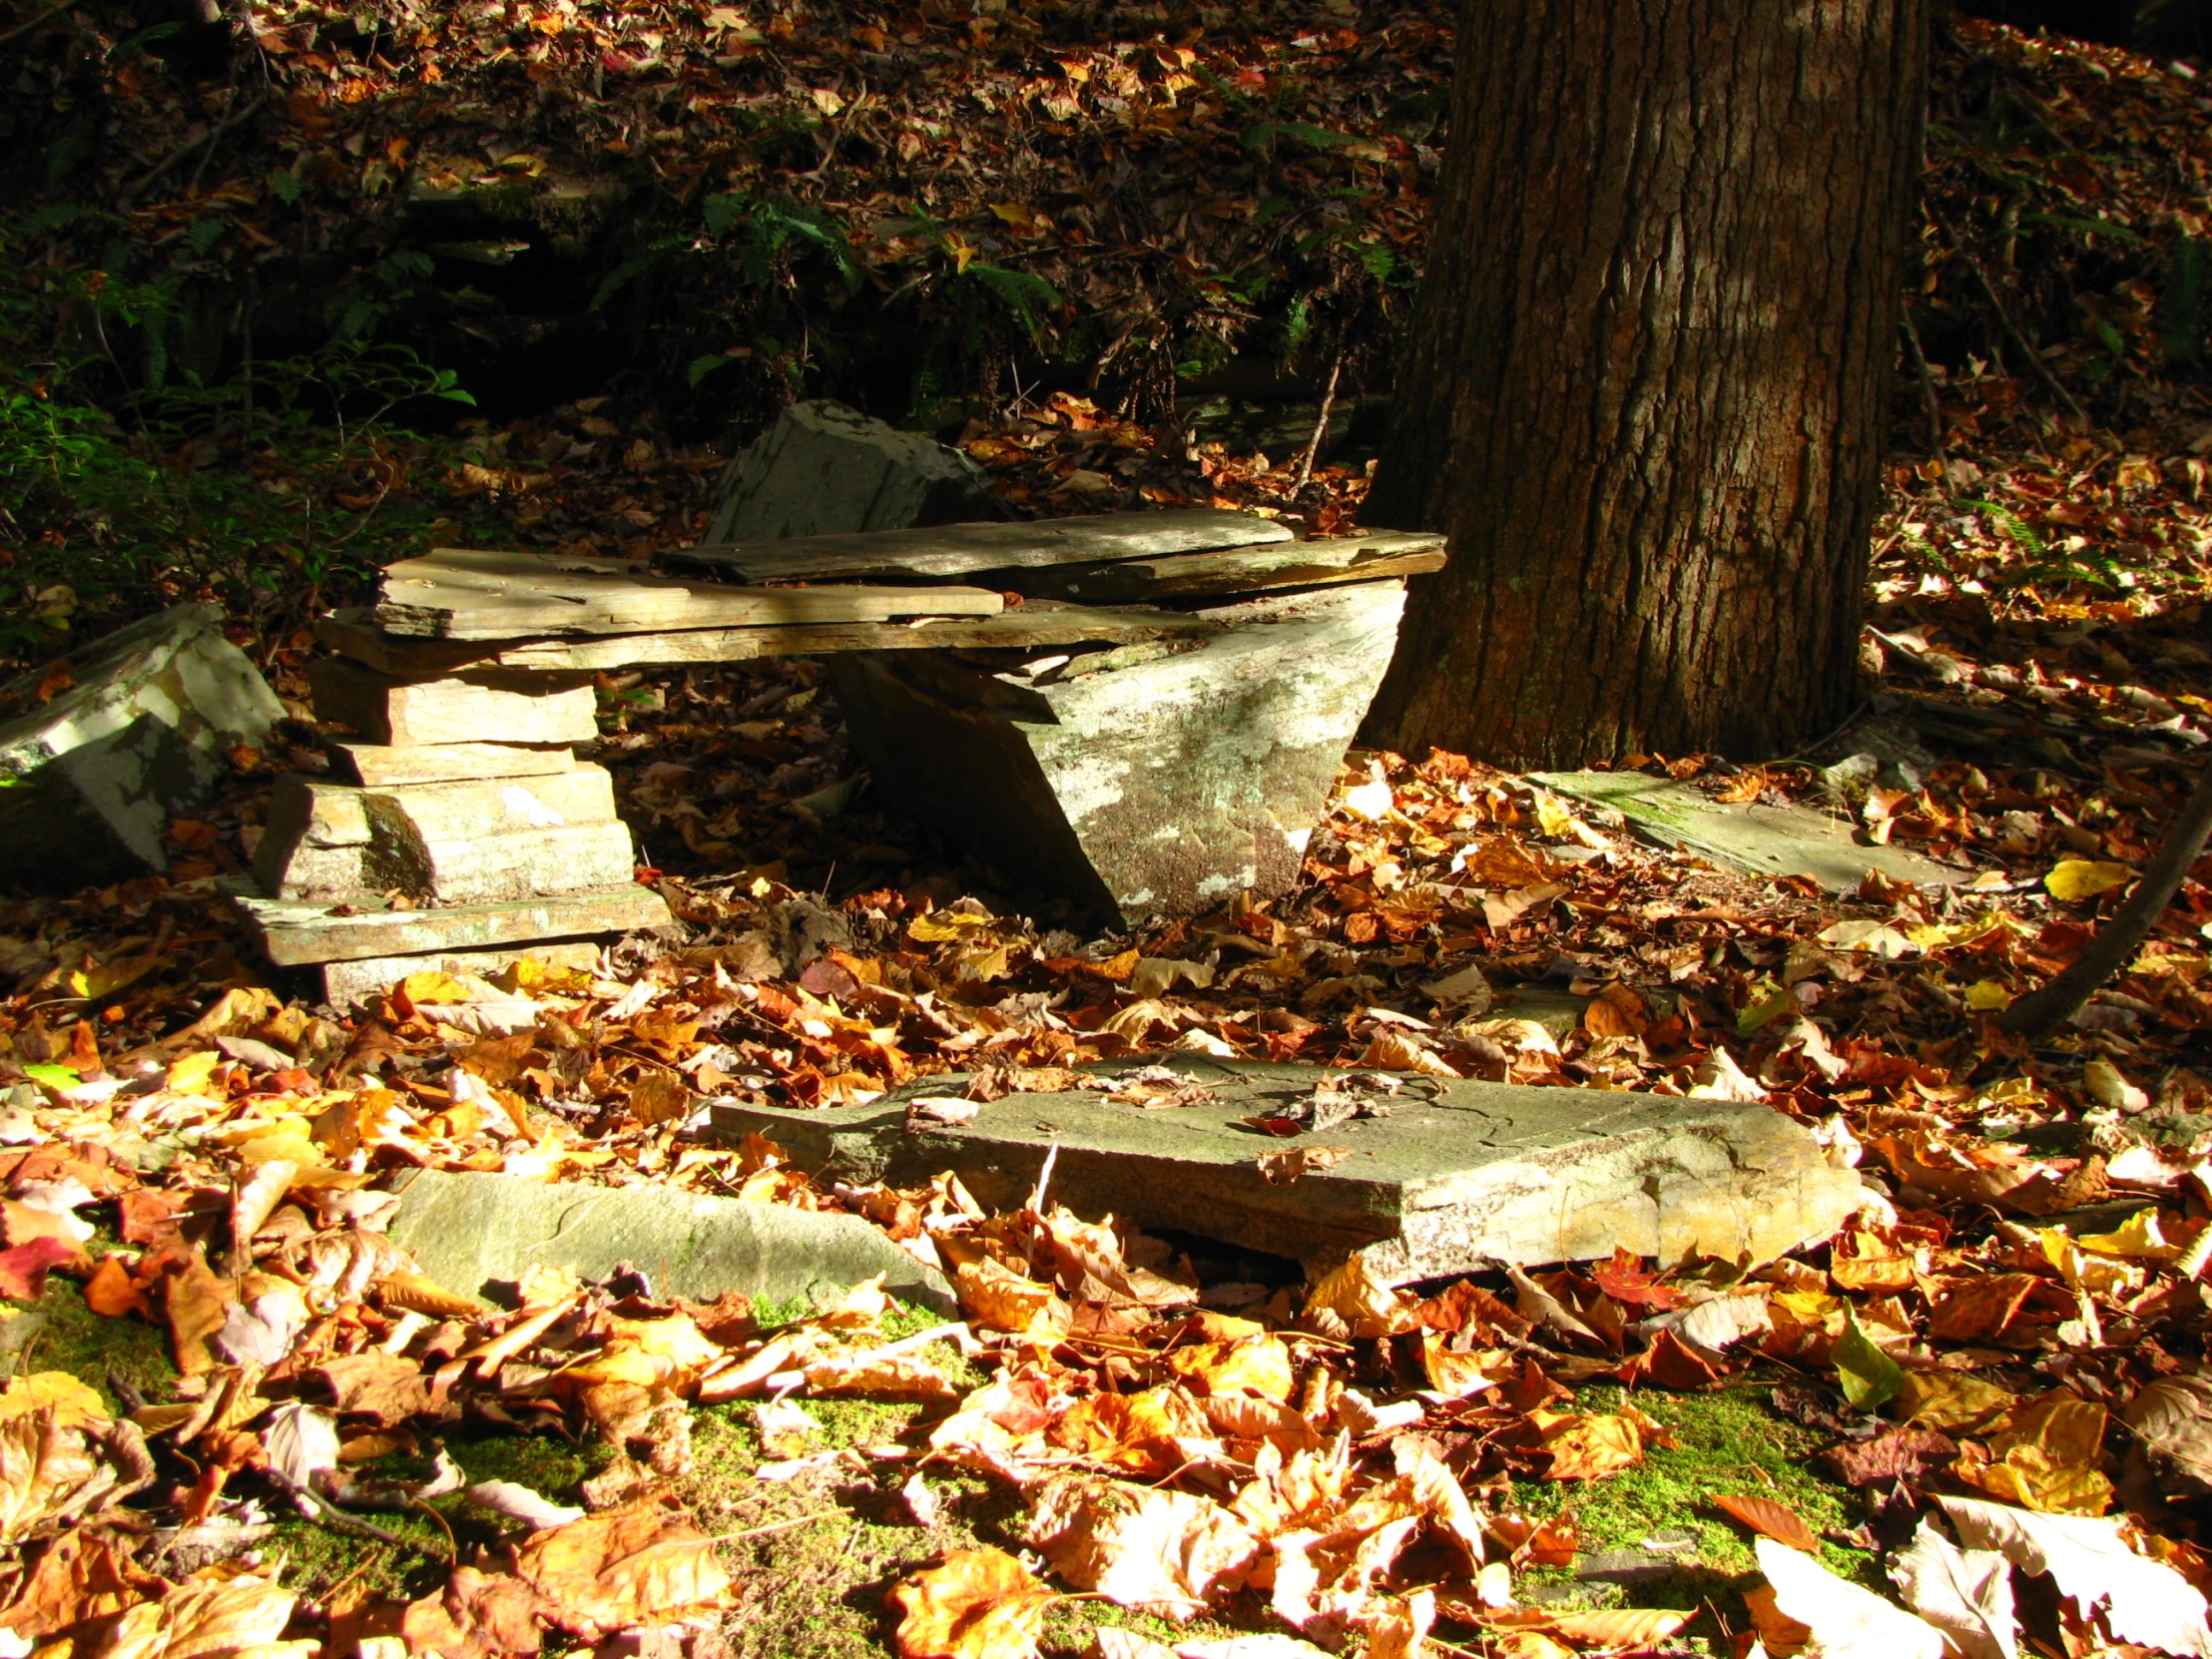 a broken bench in the fall leaves near a tree